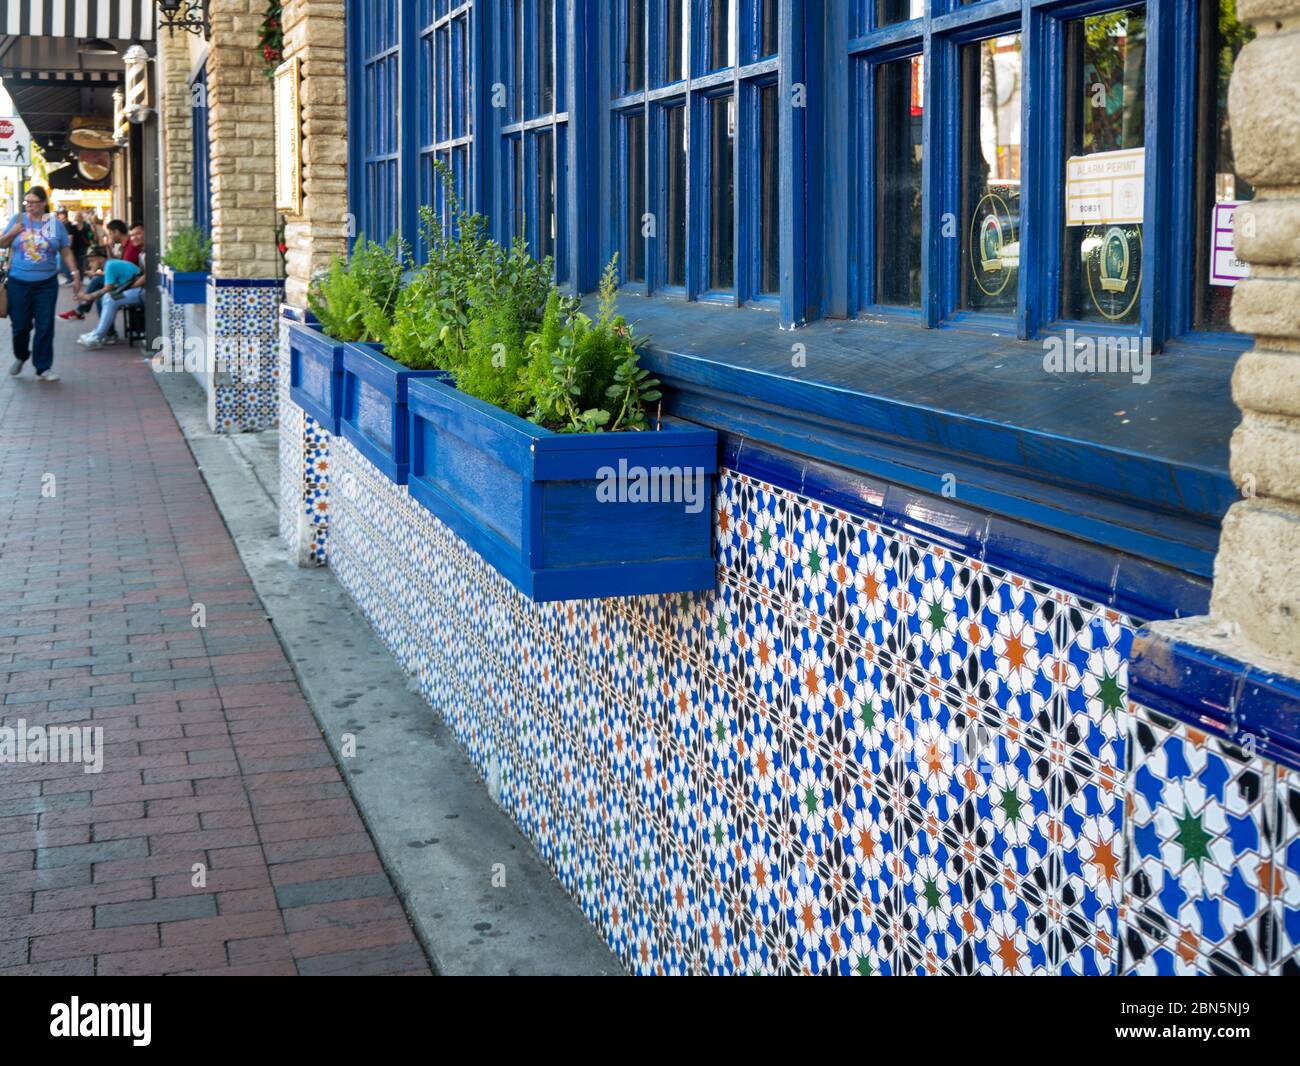 25 November 2019, Miami, Florida Blue paned windows and planter boxes as well as tiled building front along calle ocho in Little Havana, Miami, Florid Stock Photo